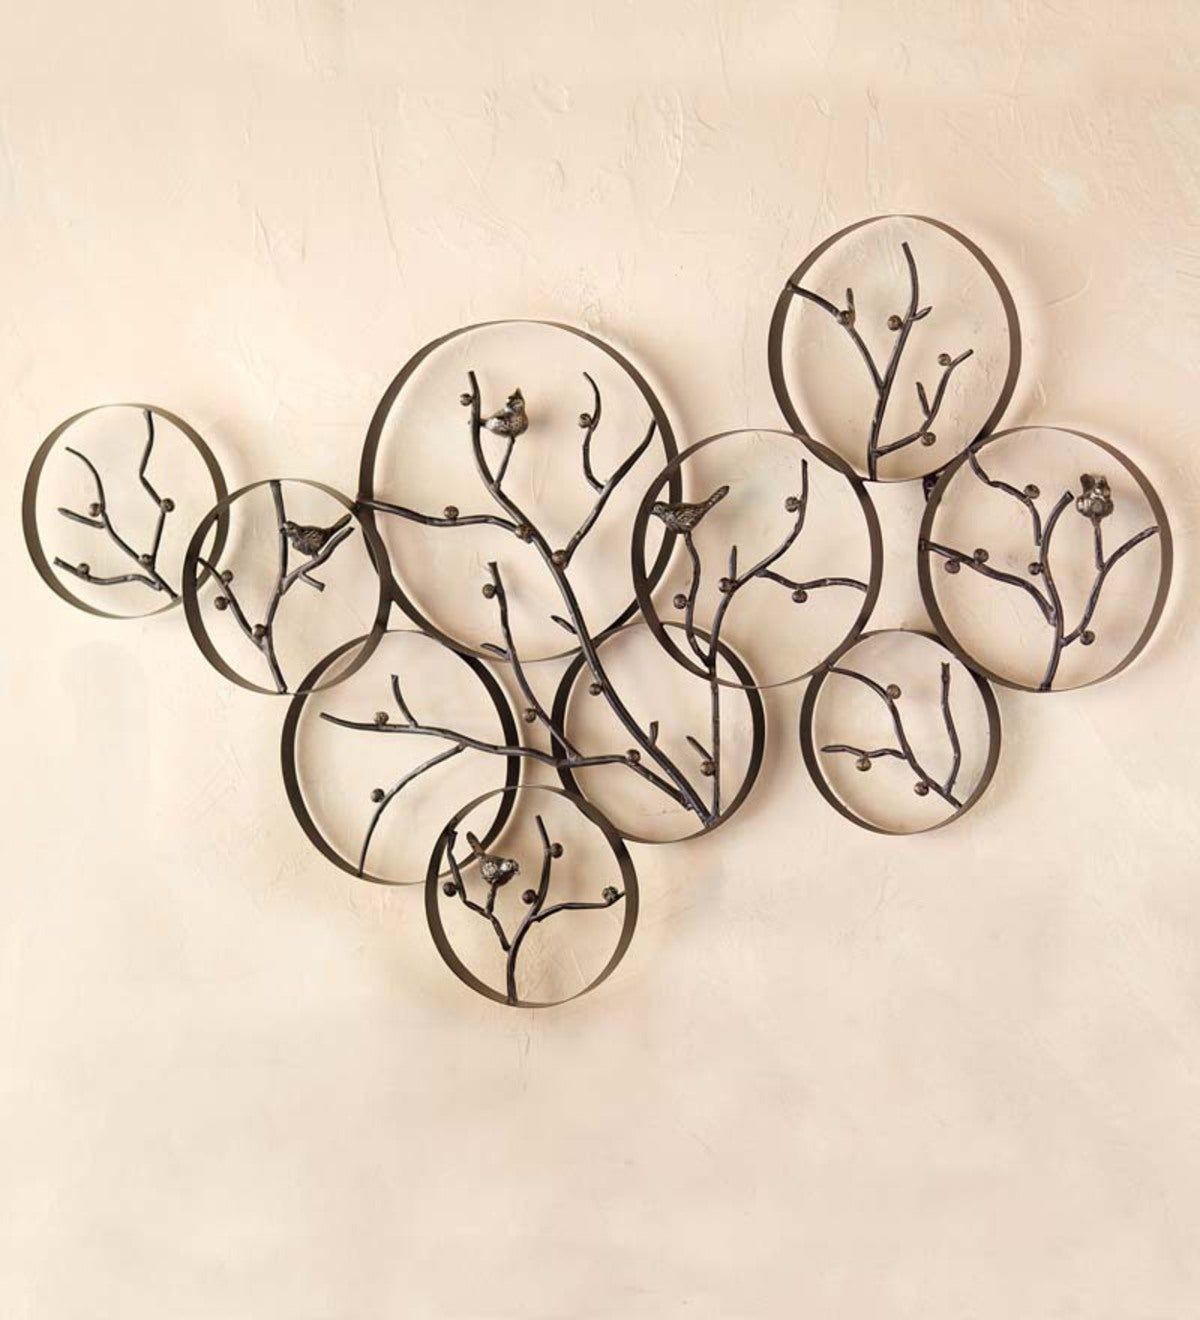 Metal Bird And Branch Wall Art | Plowhearth Within Recent Metal Bird Wall Art (View 15 of 20)